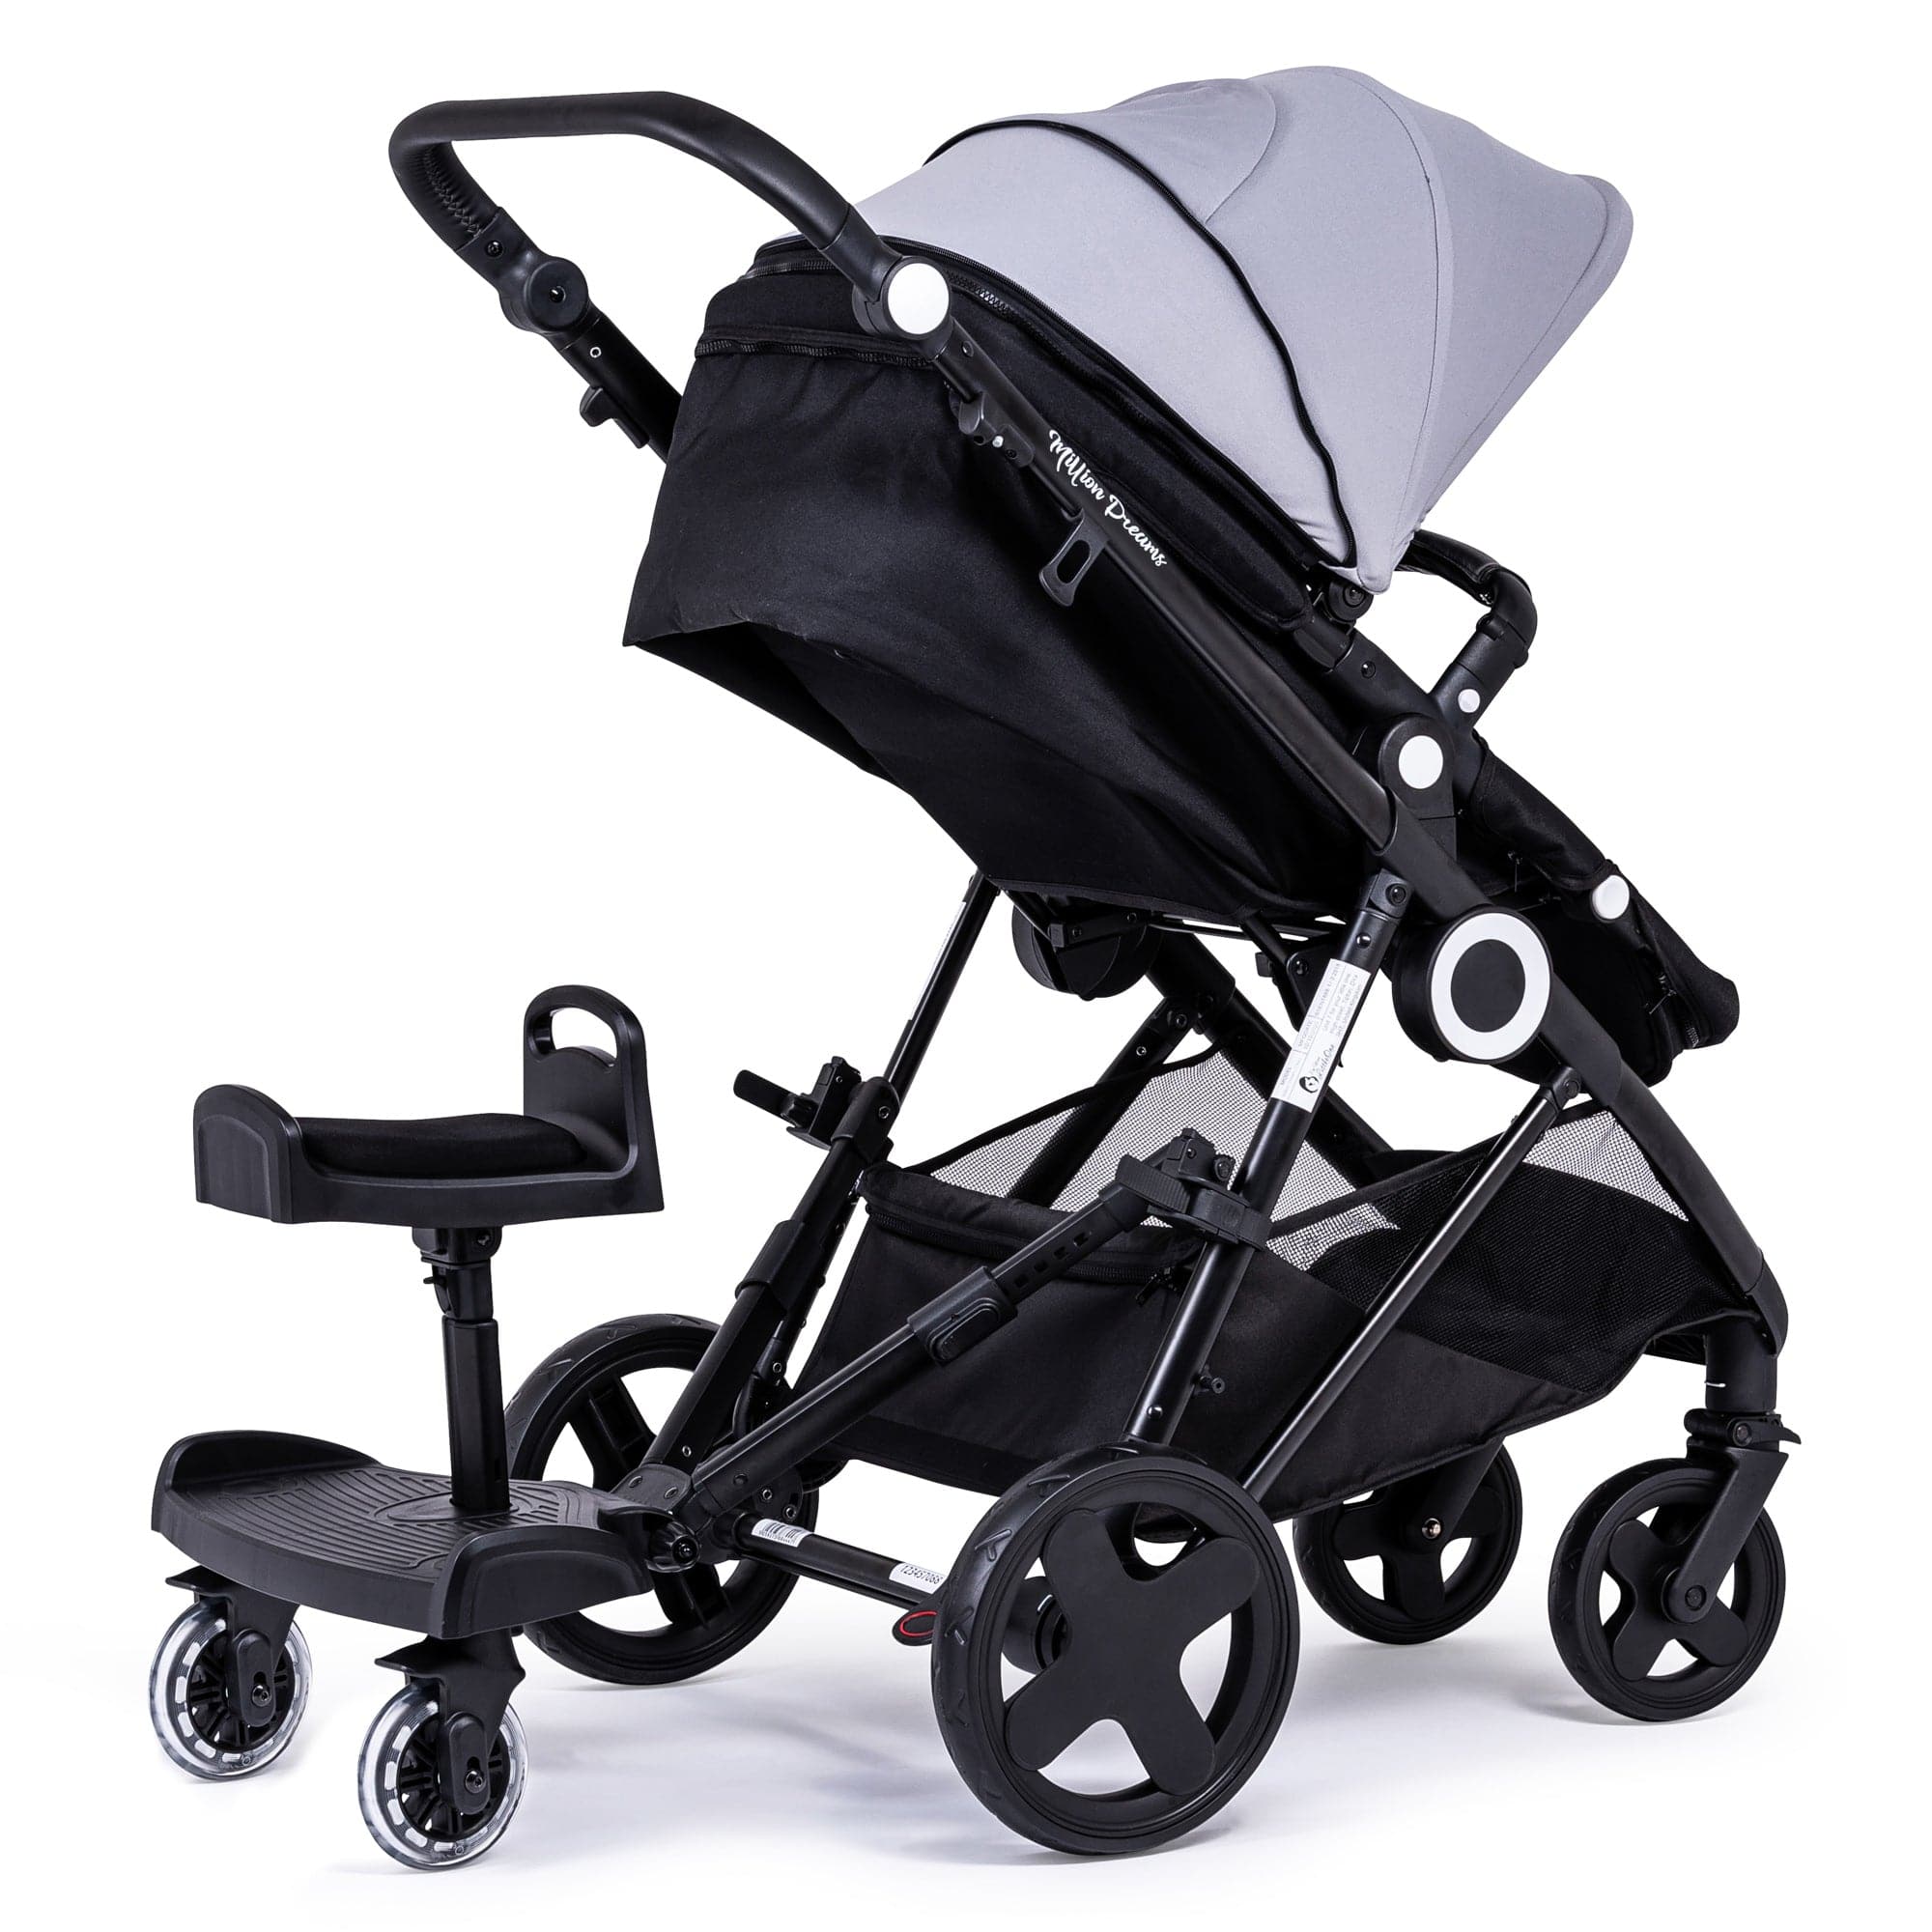 Ride On Board with Saddle Compatible with Mountain Buggy - For Your Little One